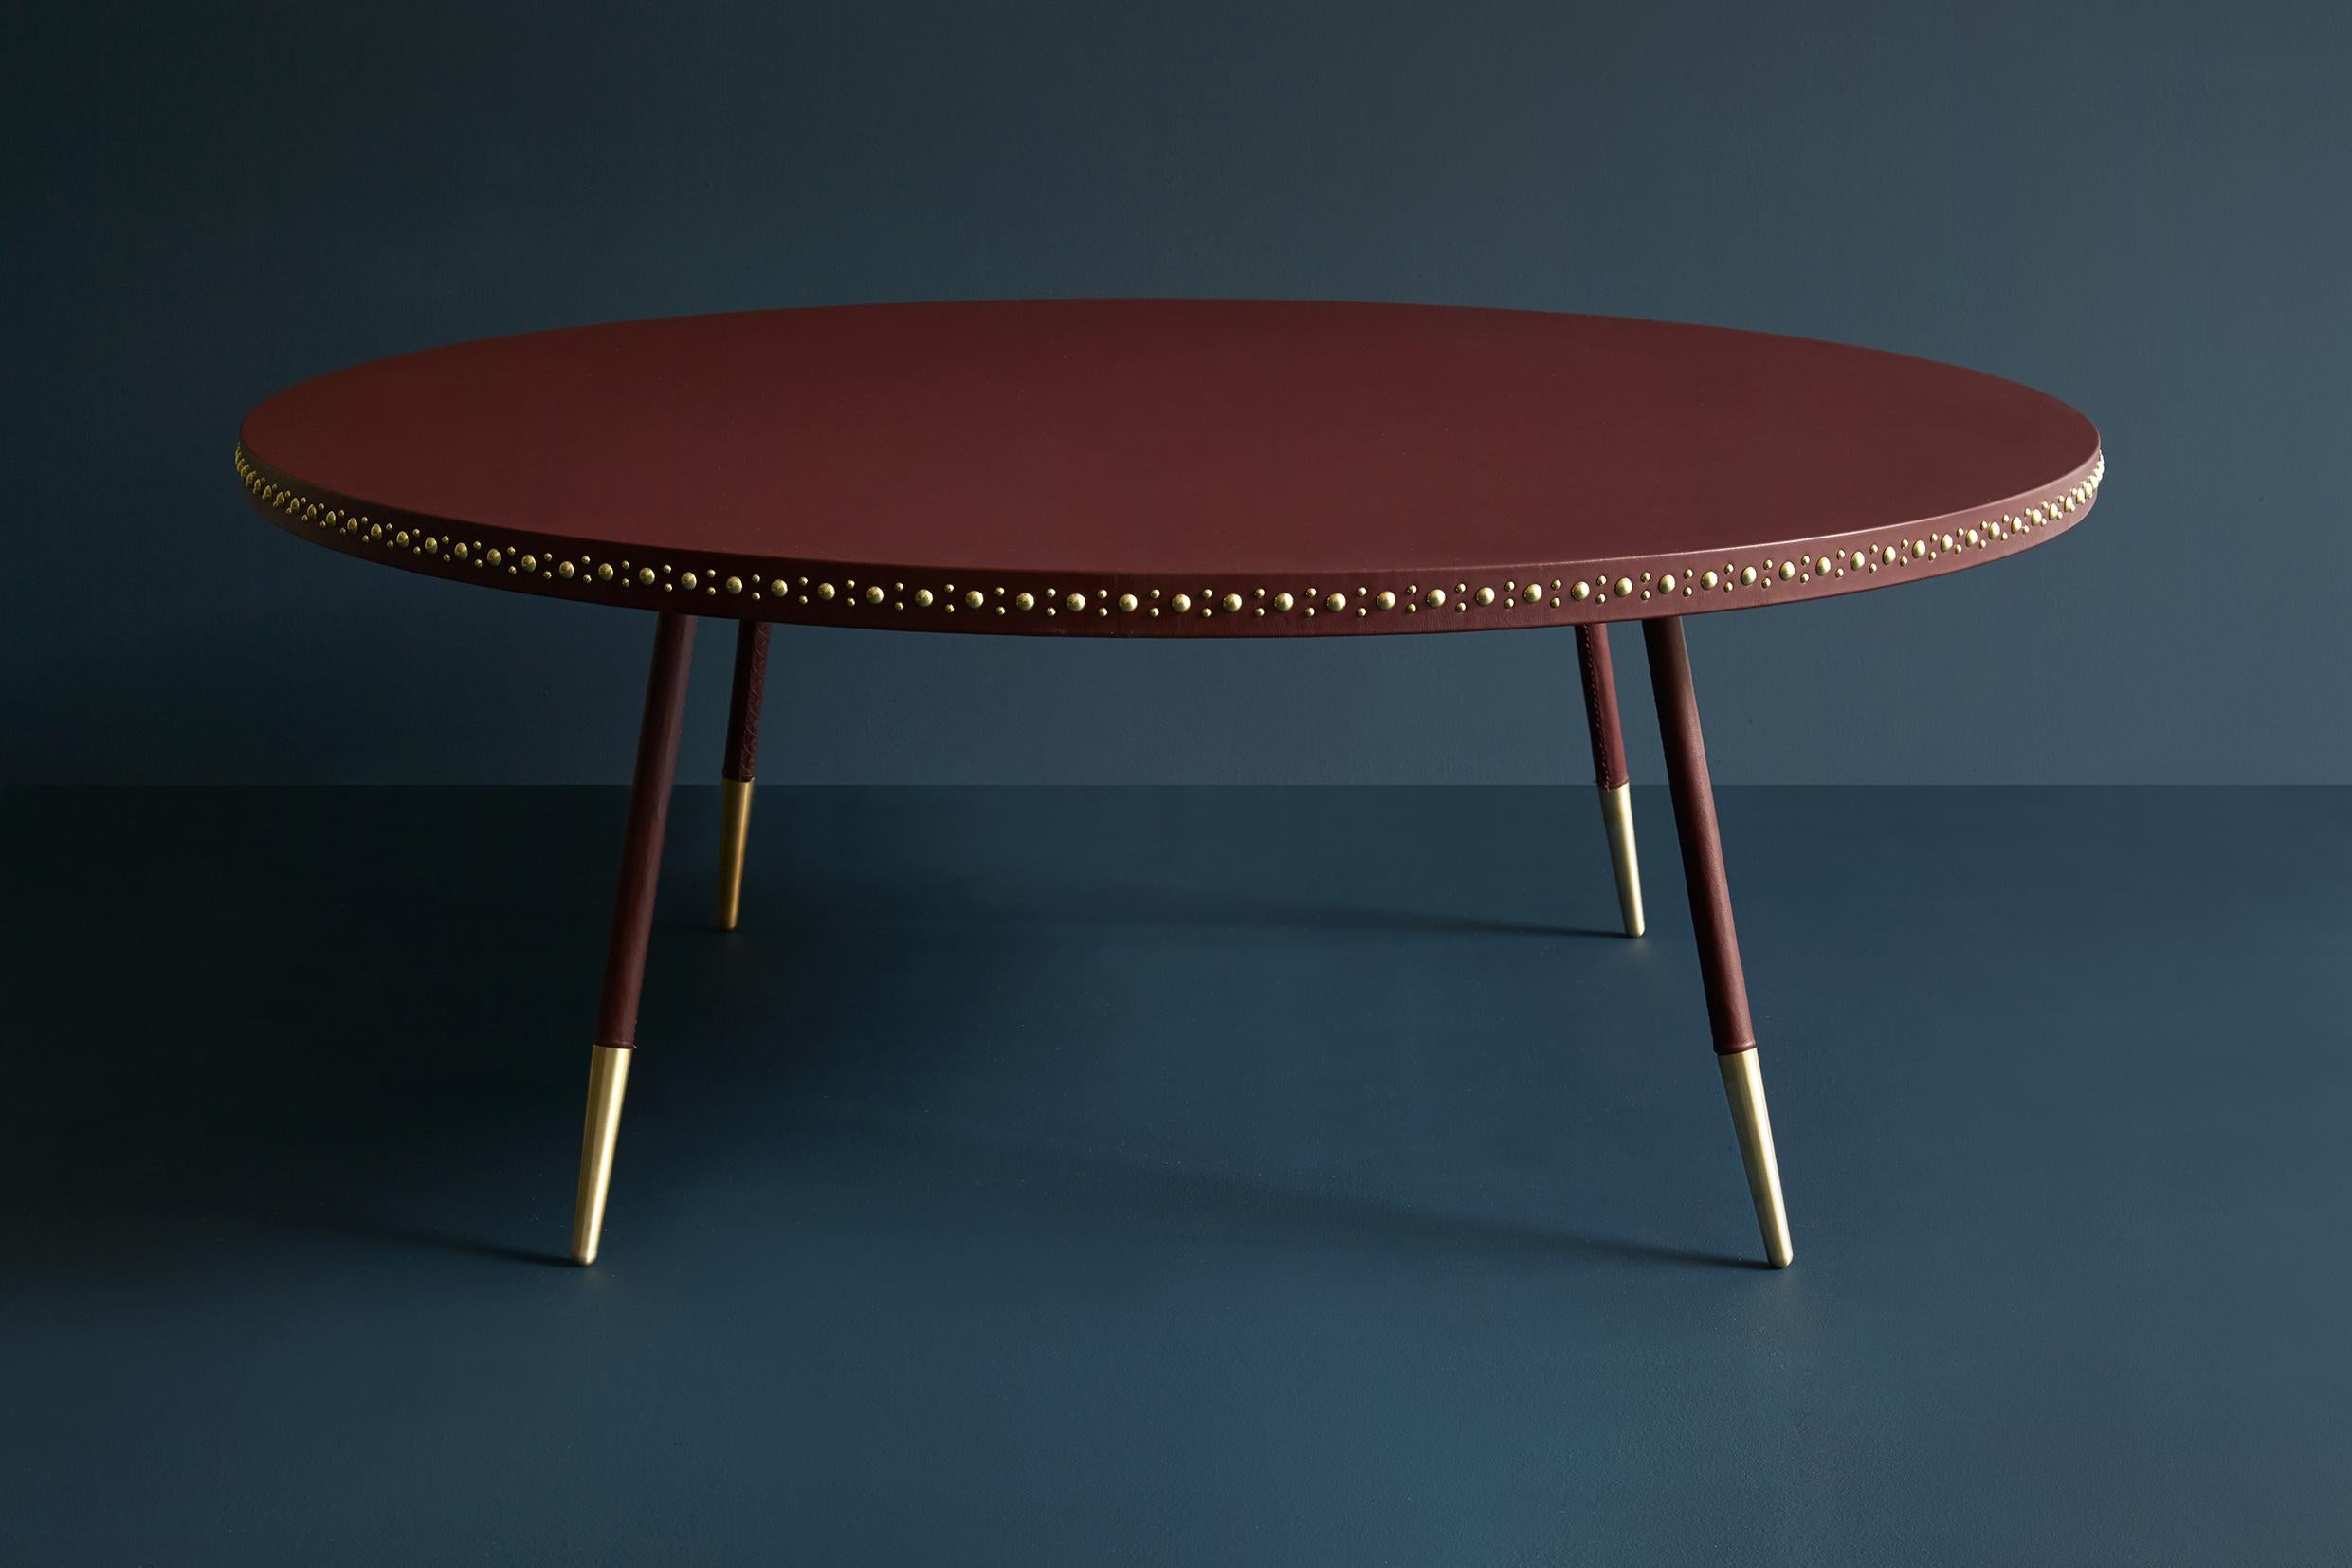 Bethan Gray has taken inspiration from the stud work found on Asian and Arabic doors to develop the aesthetic on her
Stud range of tables. Studding was traditionally used to join two materials together, such as leather or wood, and was
later used